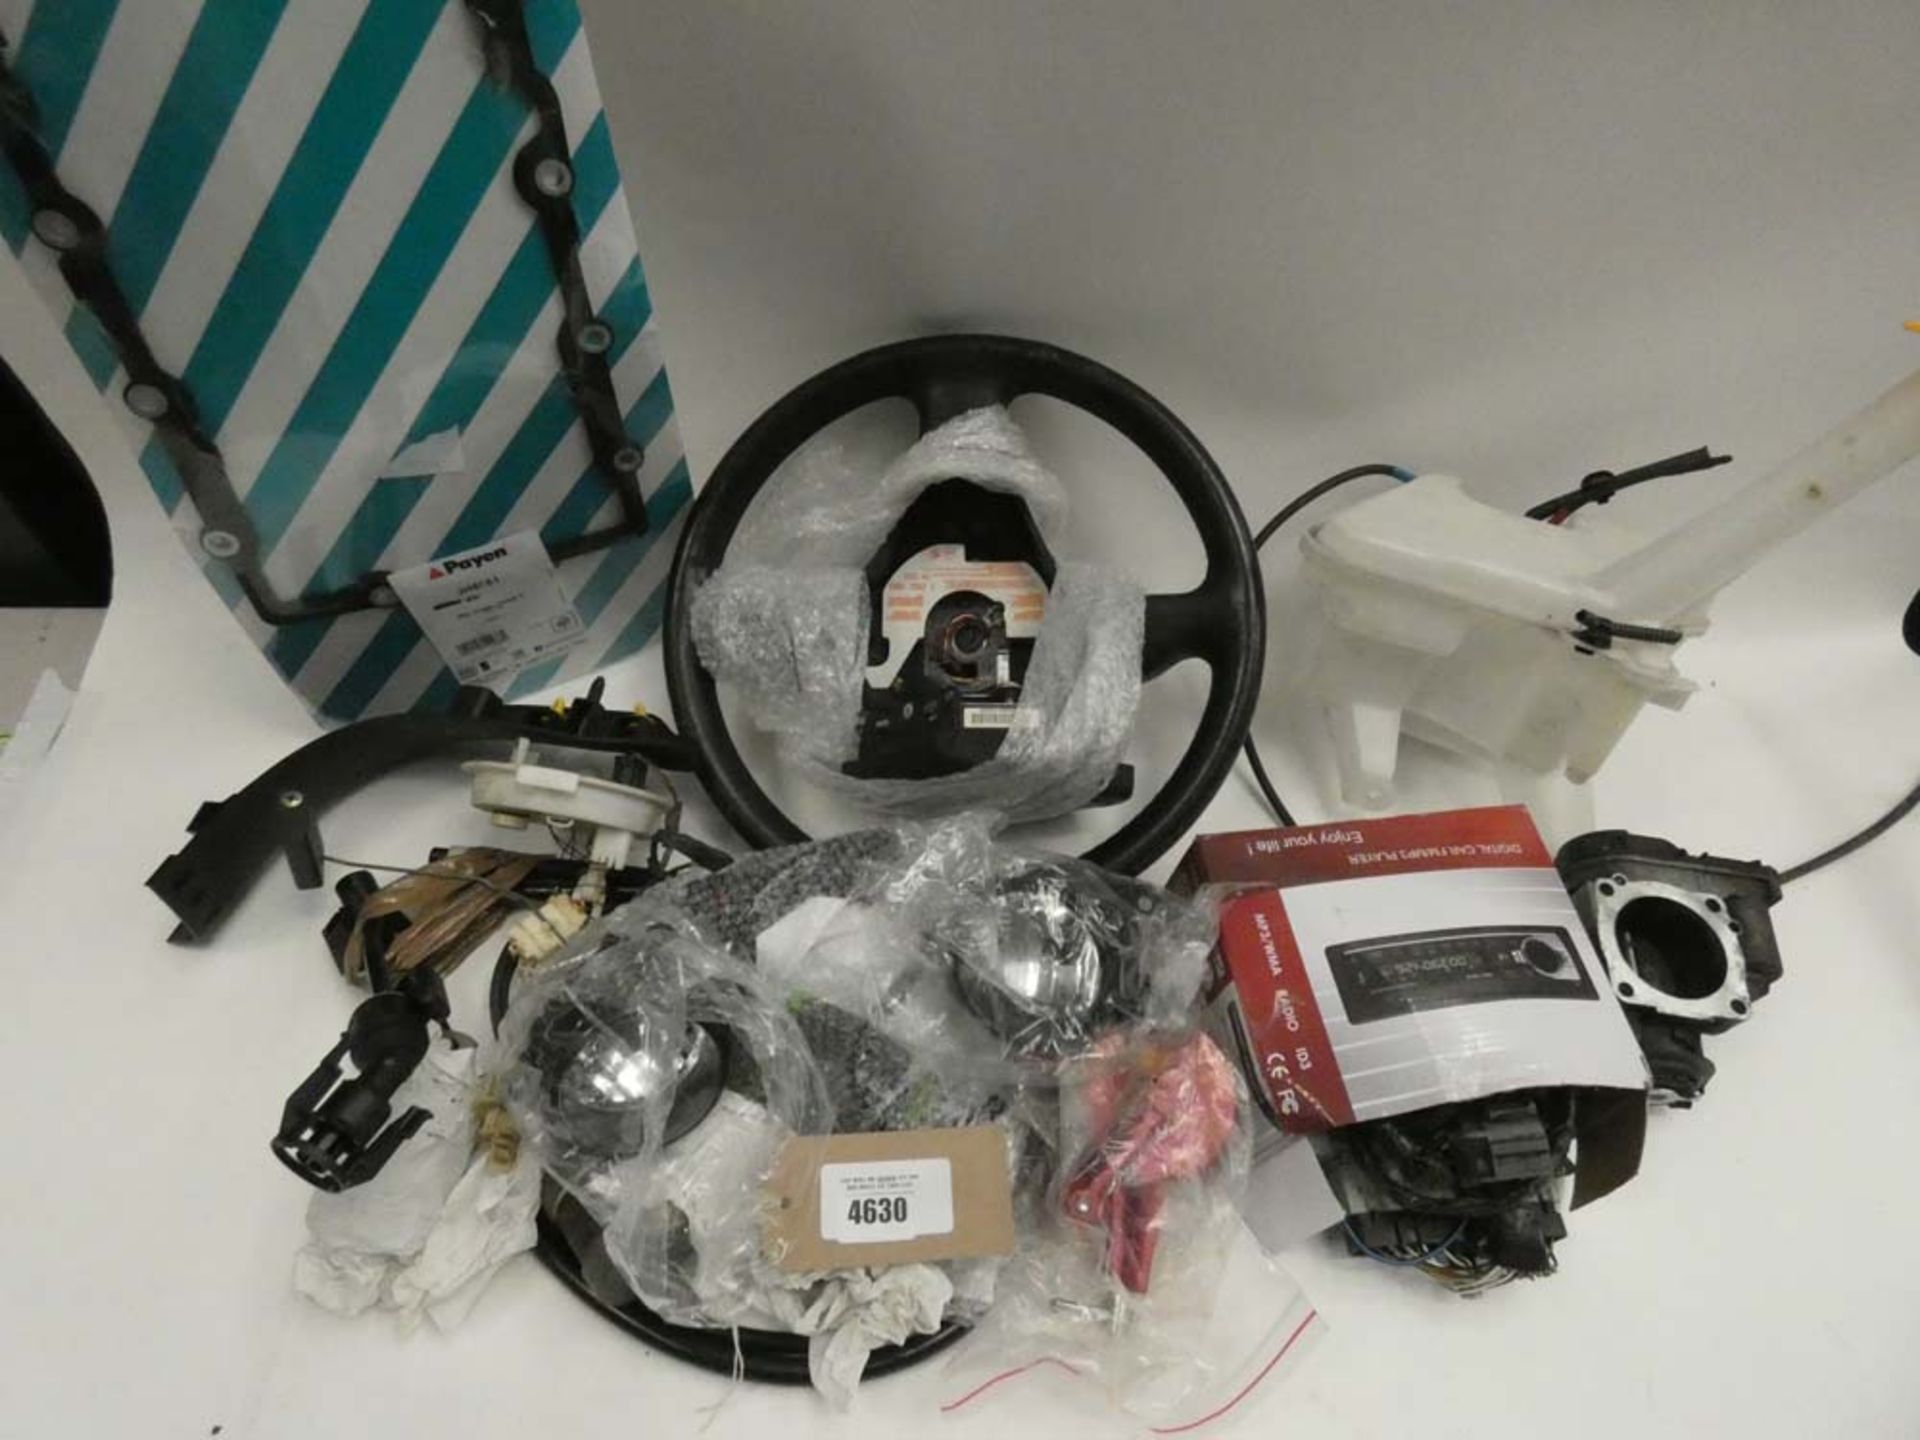 Bag of car parts including steering wheels, washer bottles, gaskets, lights, and other parts